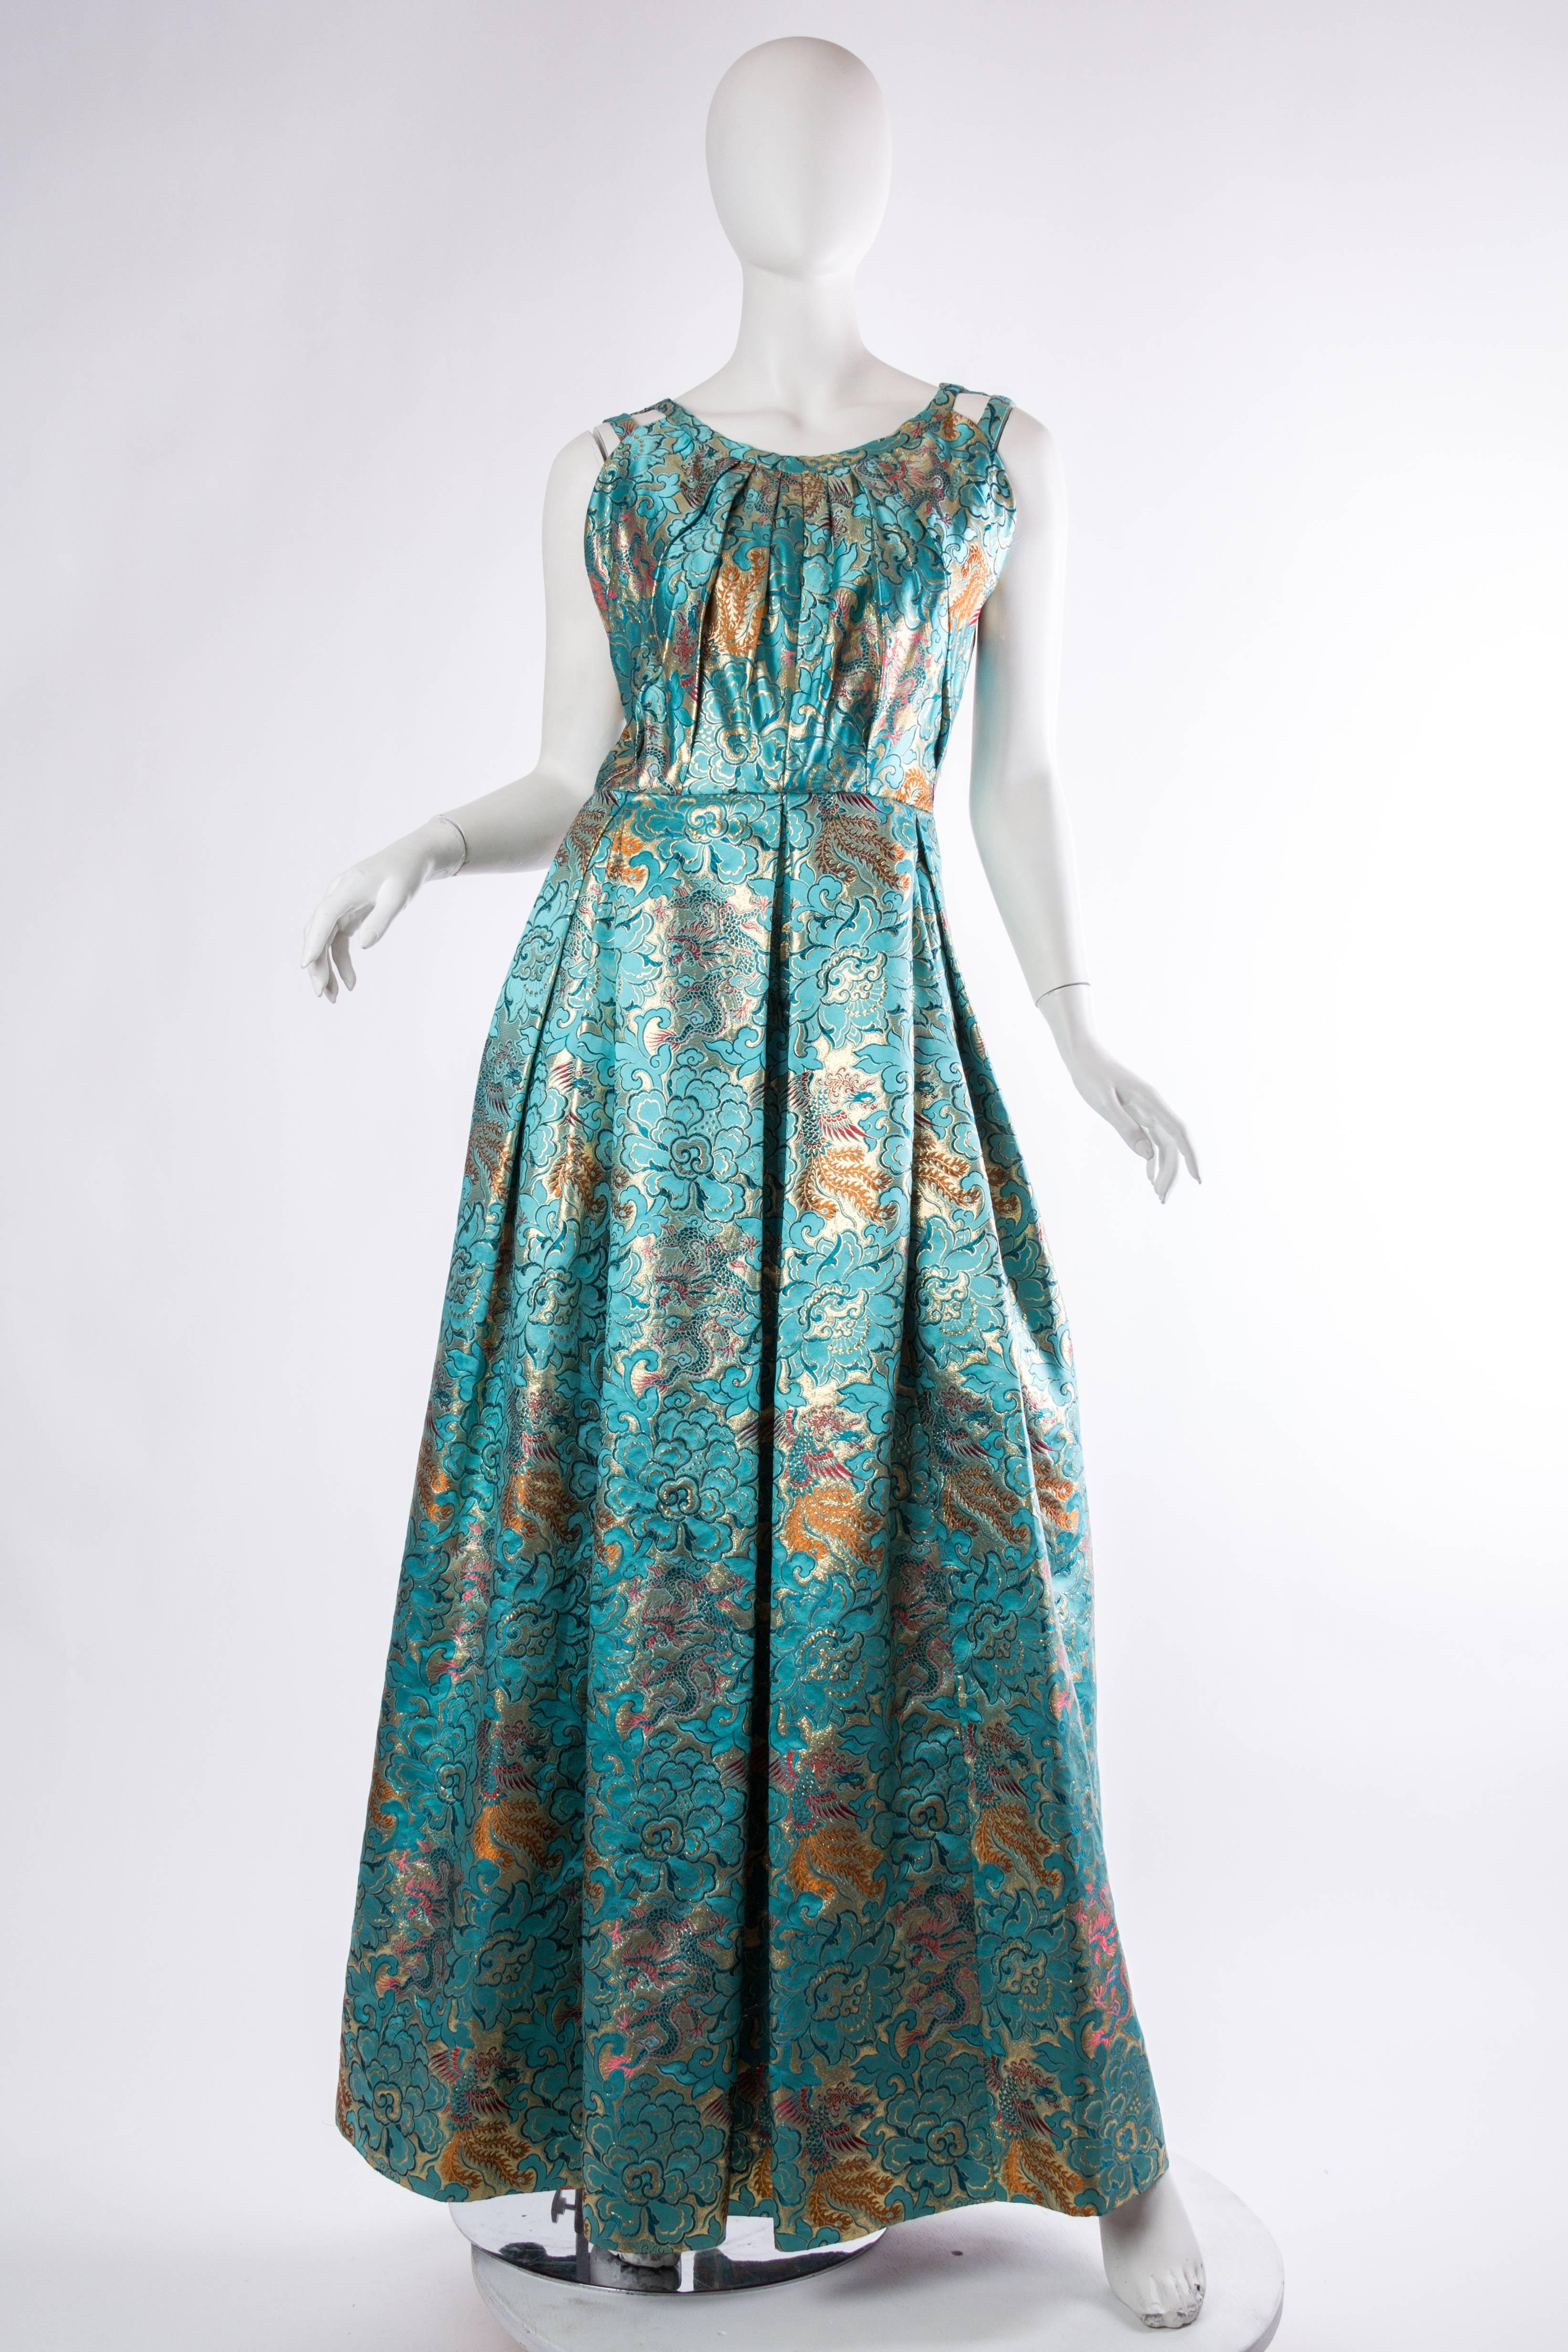 MORPHEW COLLECTION Teal & Gold Asian Dragon And Phoenix Jacquard Reversible Gown Made Of 1960S Silk Lamé Fabric
MORPHEW COLLECTION is made entirely by hand in our NYC Ateliér of rare antique materials sourced from around the globe. Our sustainable